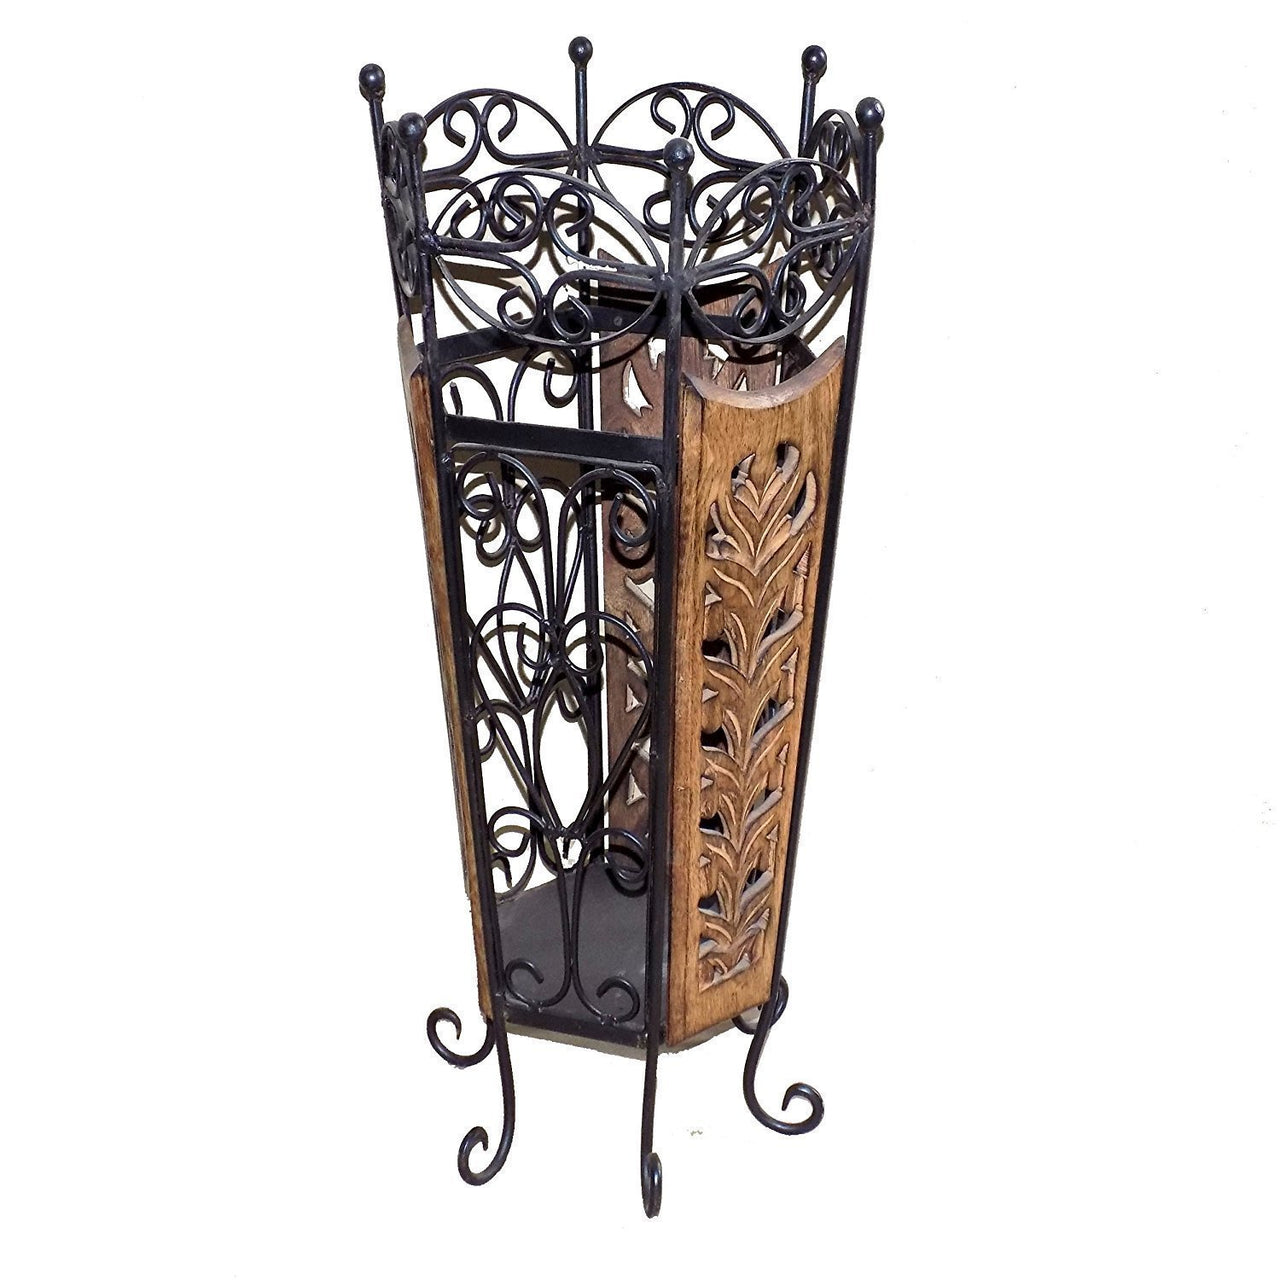 Wooden and Wrought Iron Umbrella Stand Cum Planter for Livingroom Office Bedroom Garden Dime Store